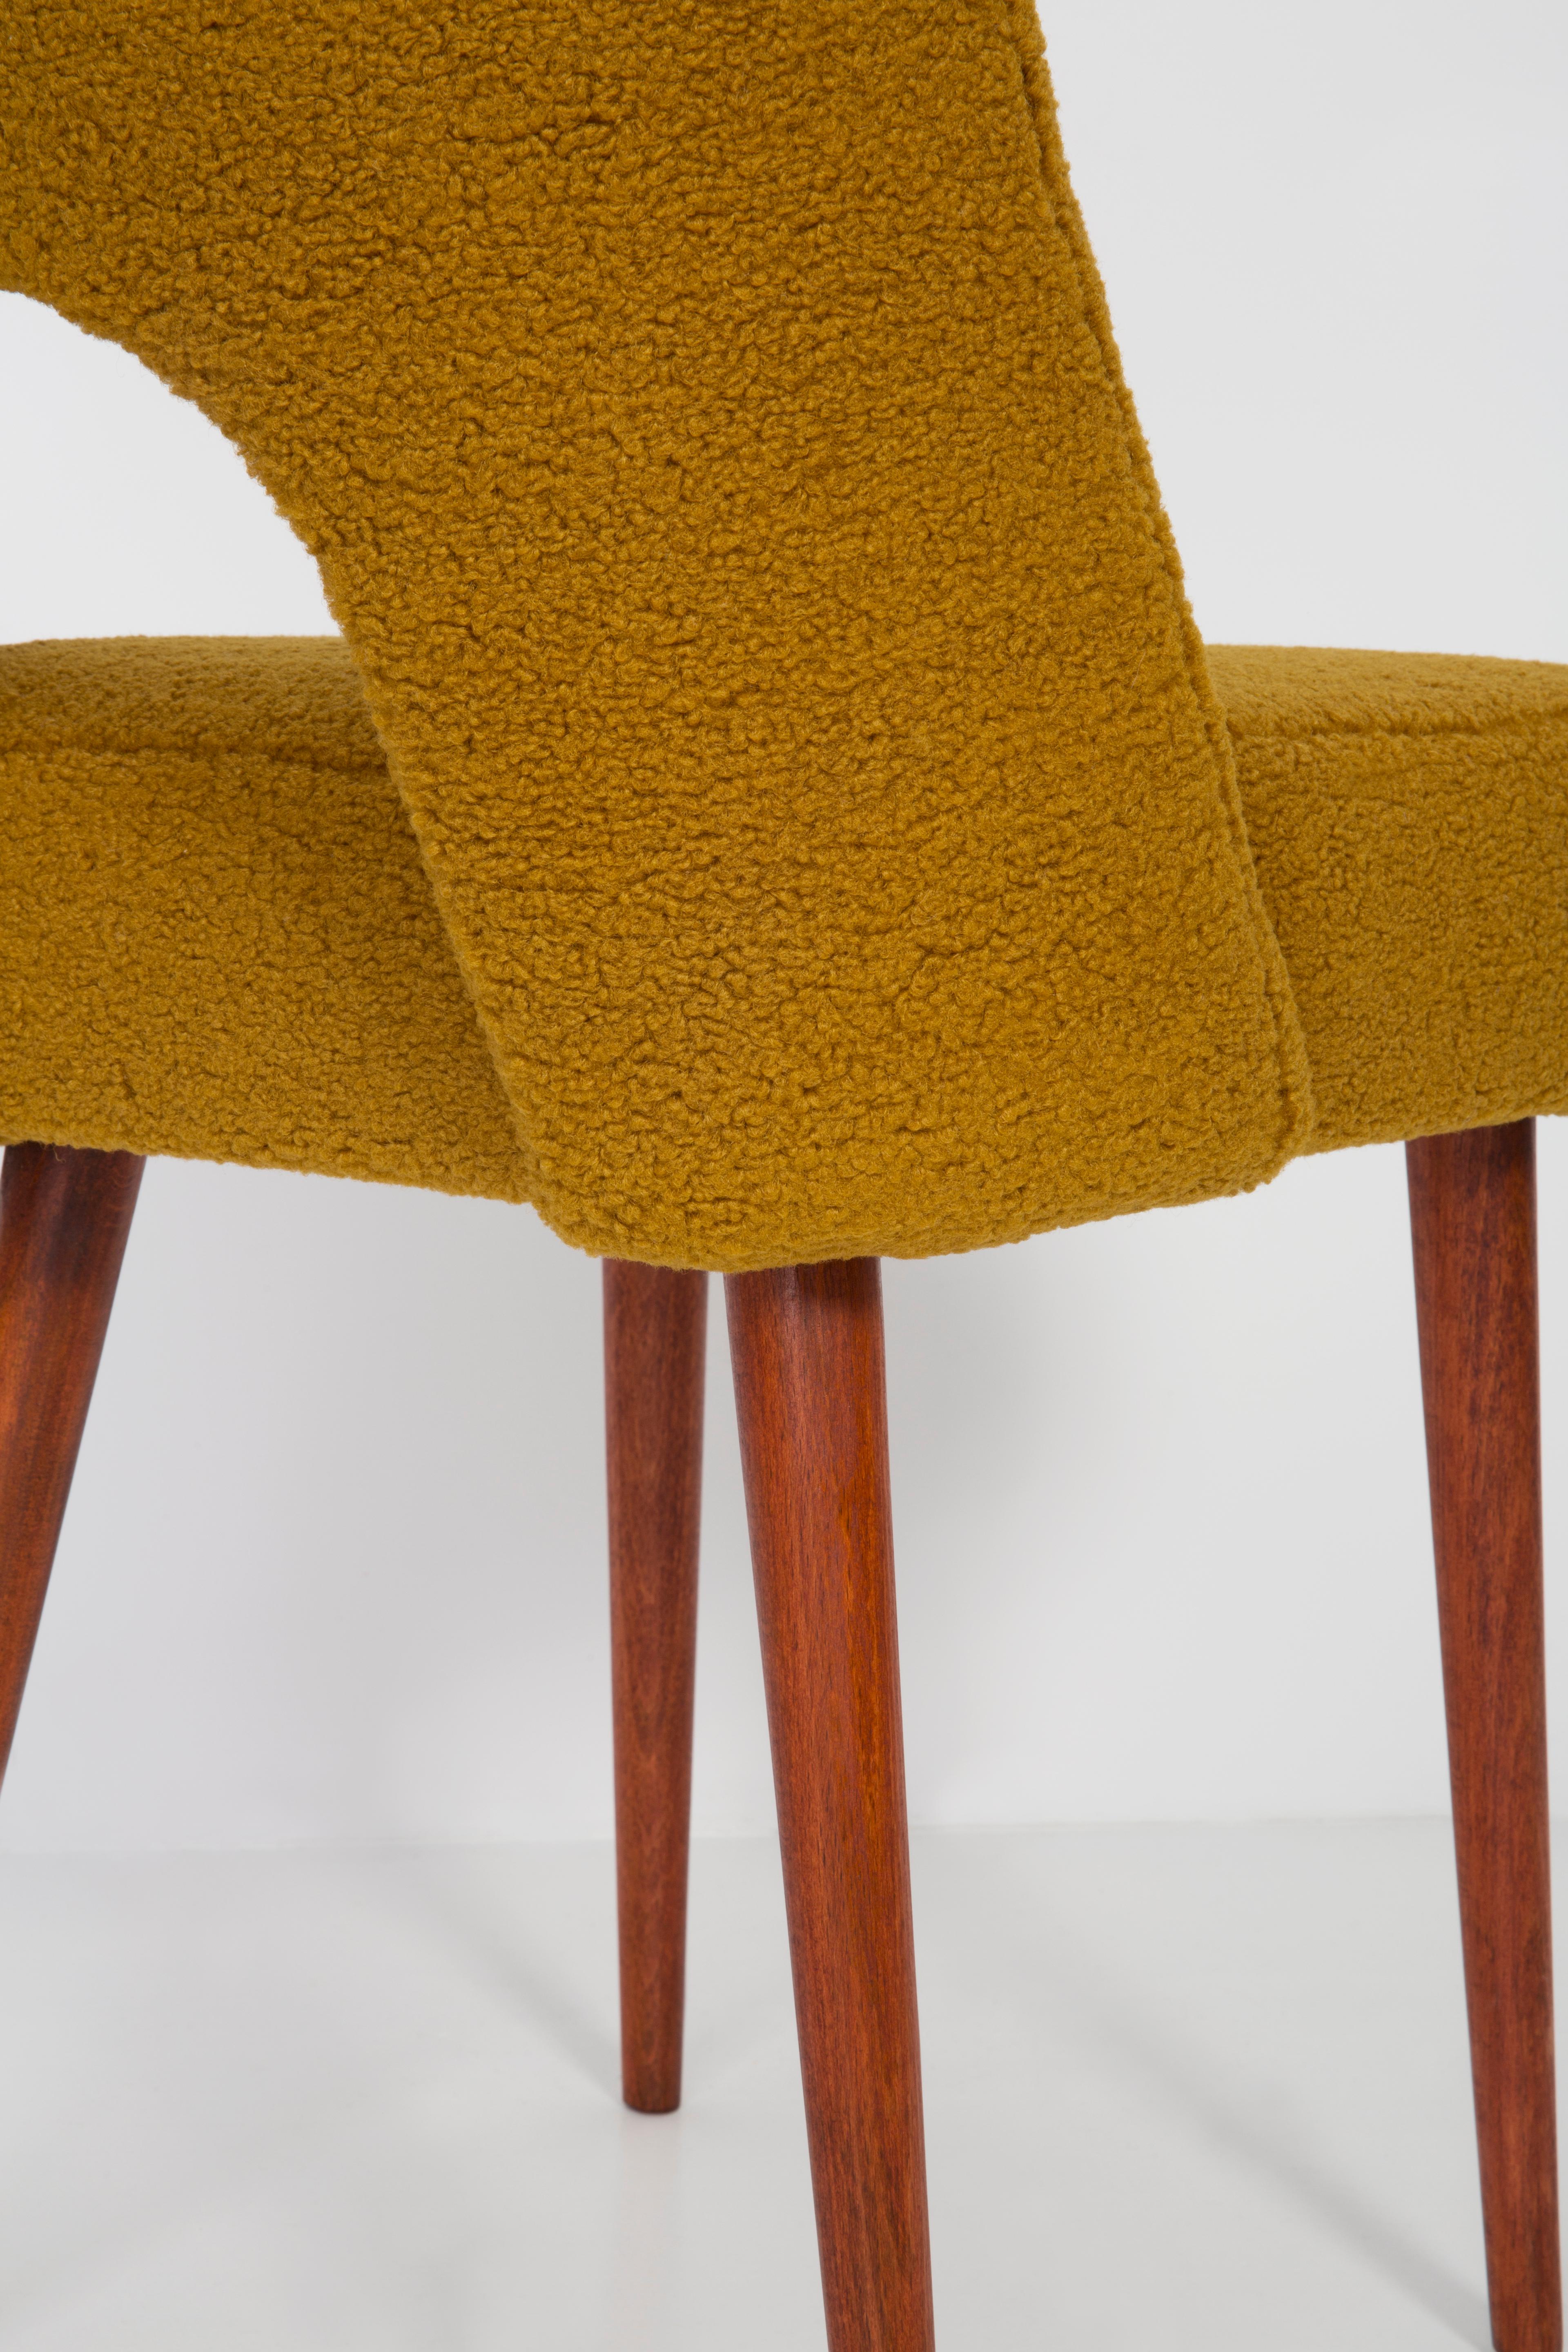 Textile Yellow Ochre Boucle 'Shell' Chair, 1960s For Sale